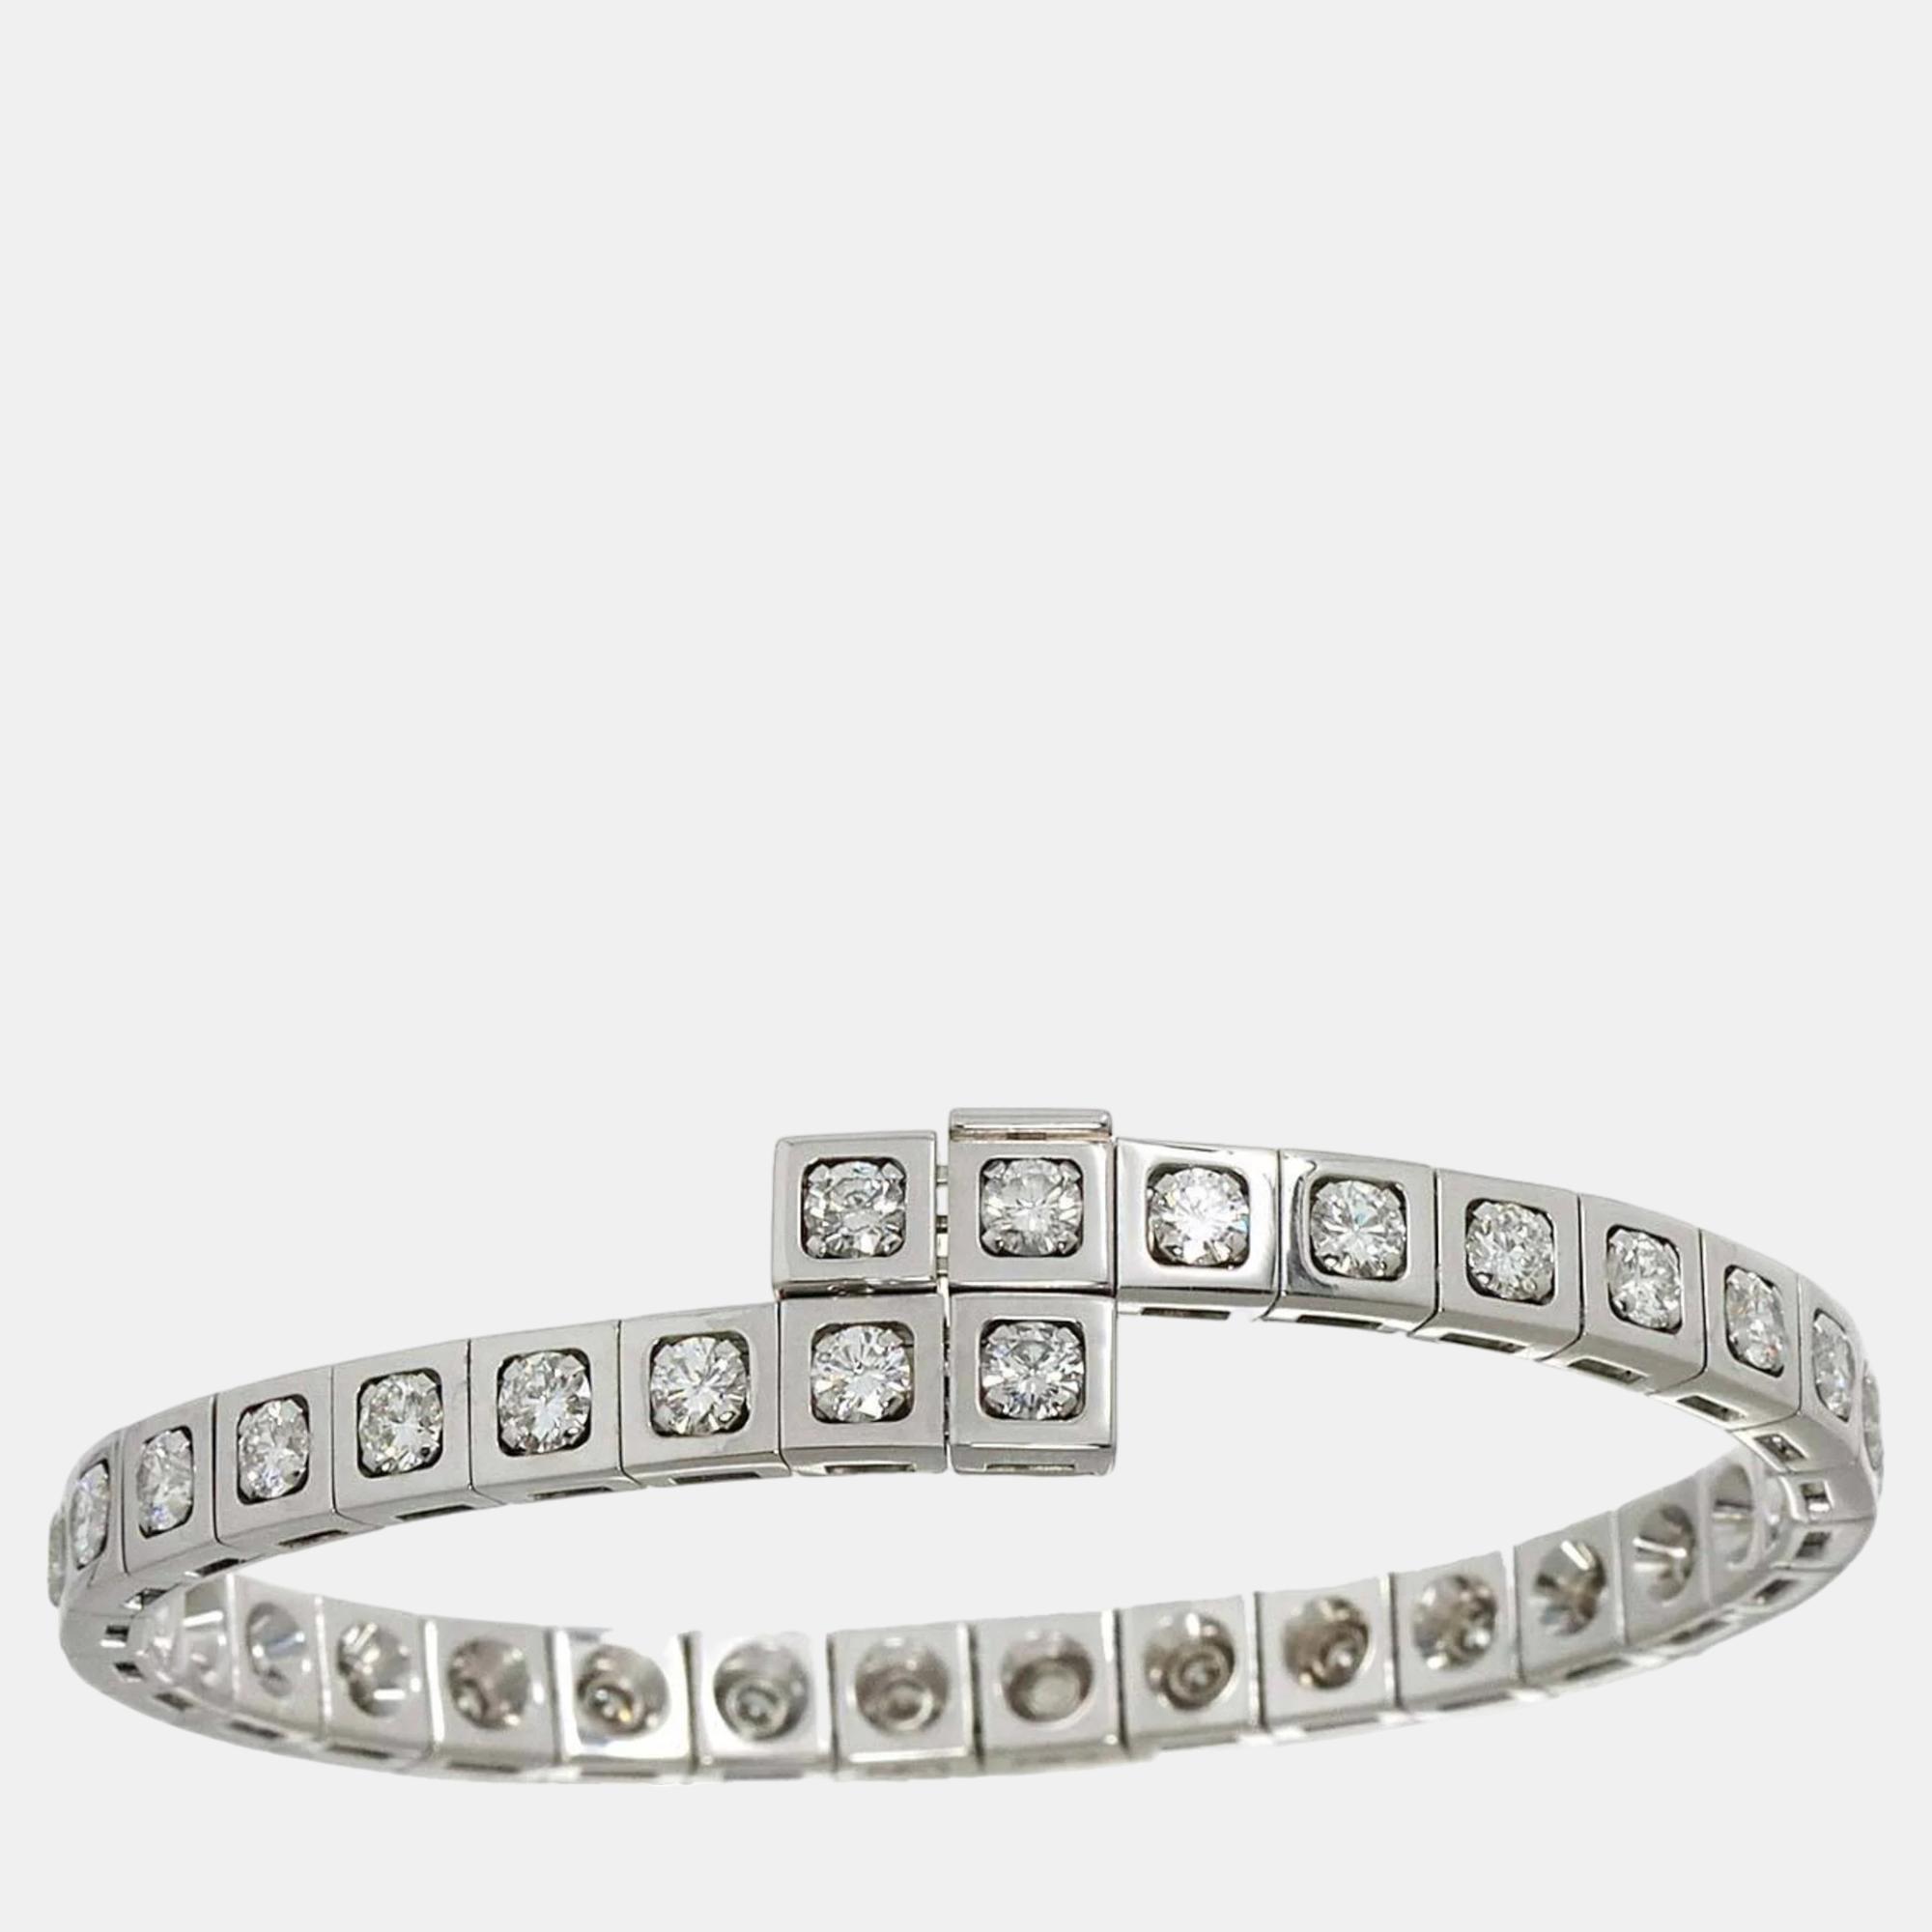 Elevate your wrist with this Cartier womens bracelet. Meticulously crafted it exudes elegance and luxury with premium materials exquisite detailing and a timeless design making it the perfect statement piece.